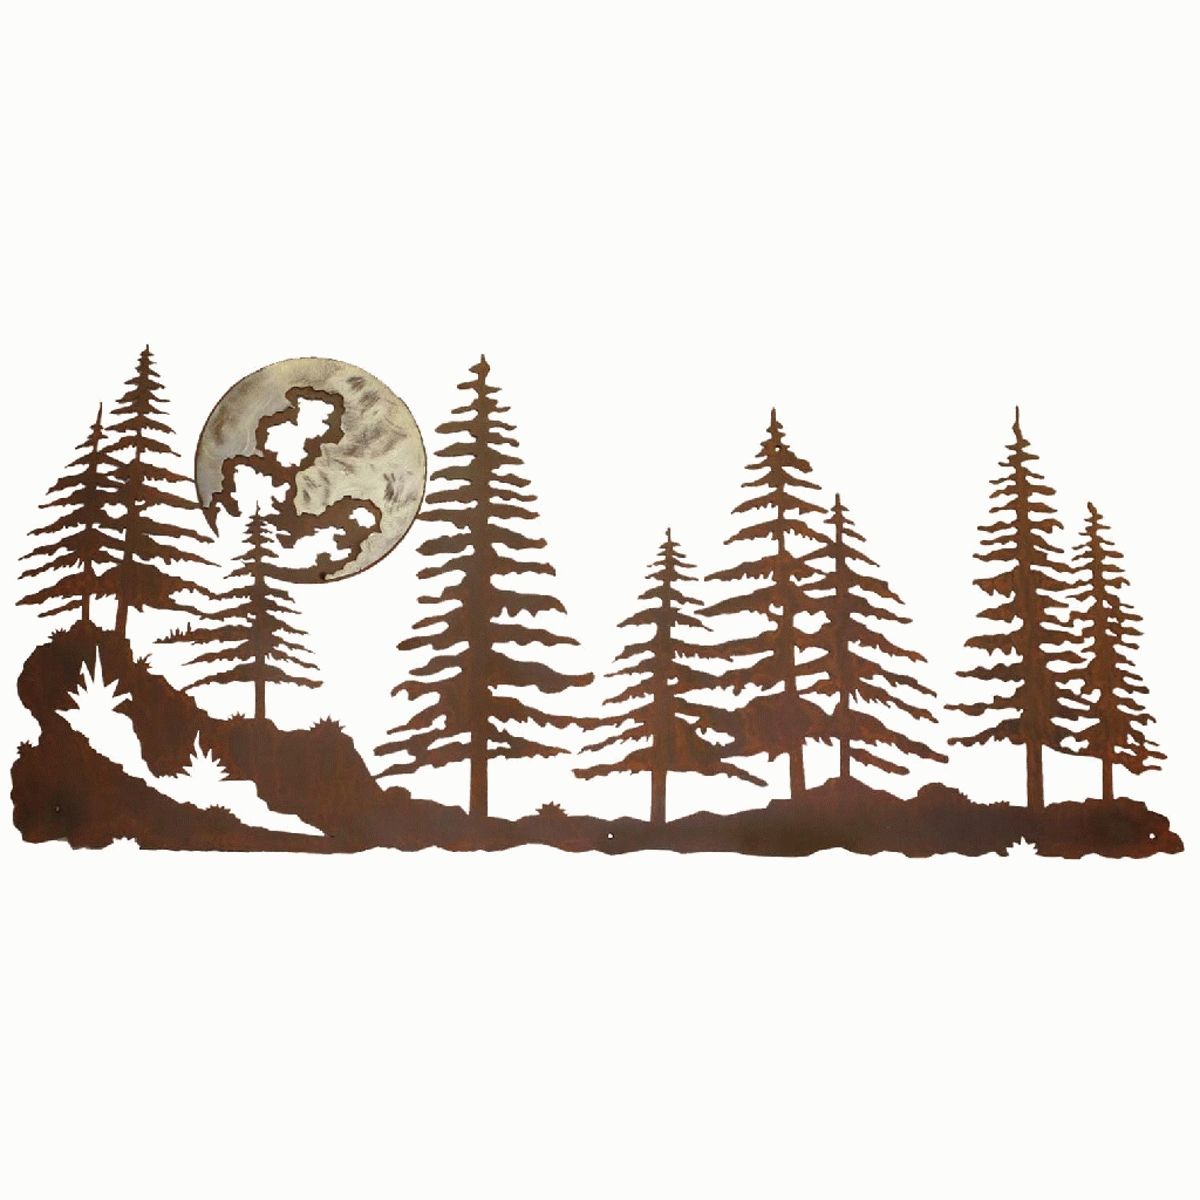 Pine Forest Burnished Metal Wall Art Pertaining To Pine Tree Metal Wall Art (View 4 of 20)